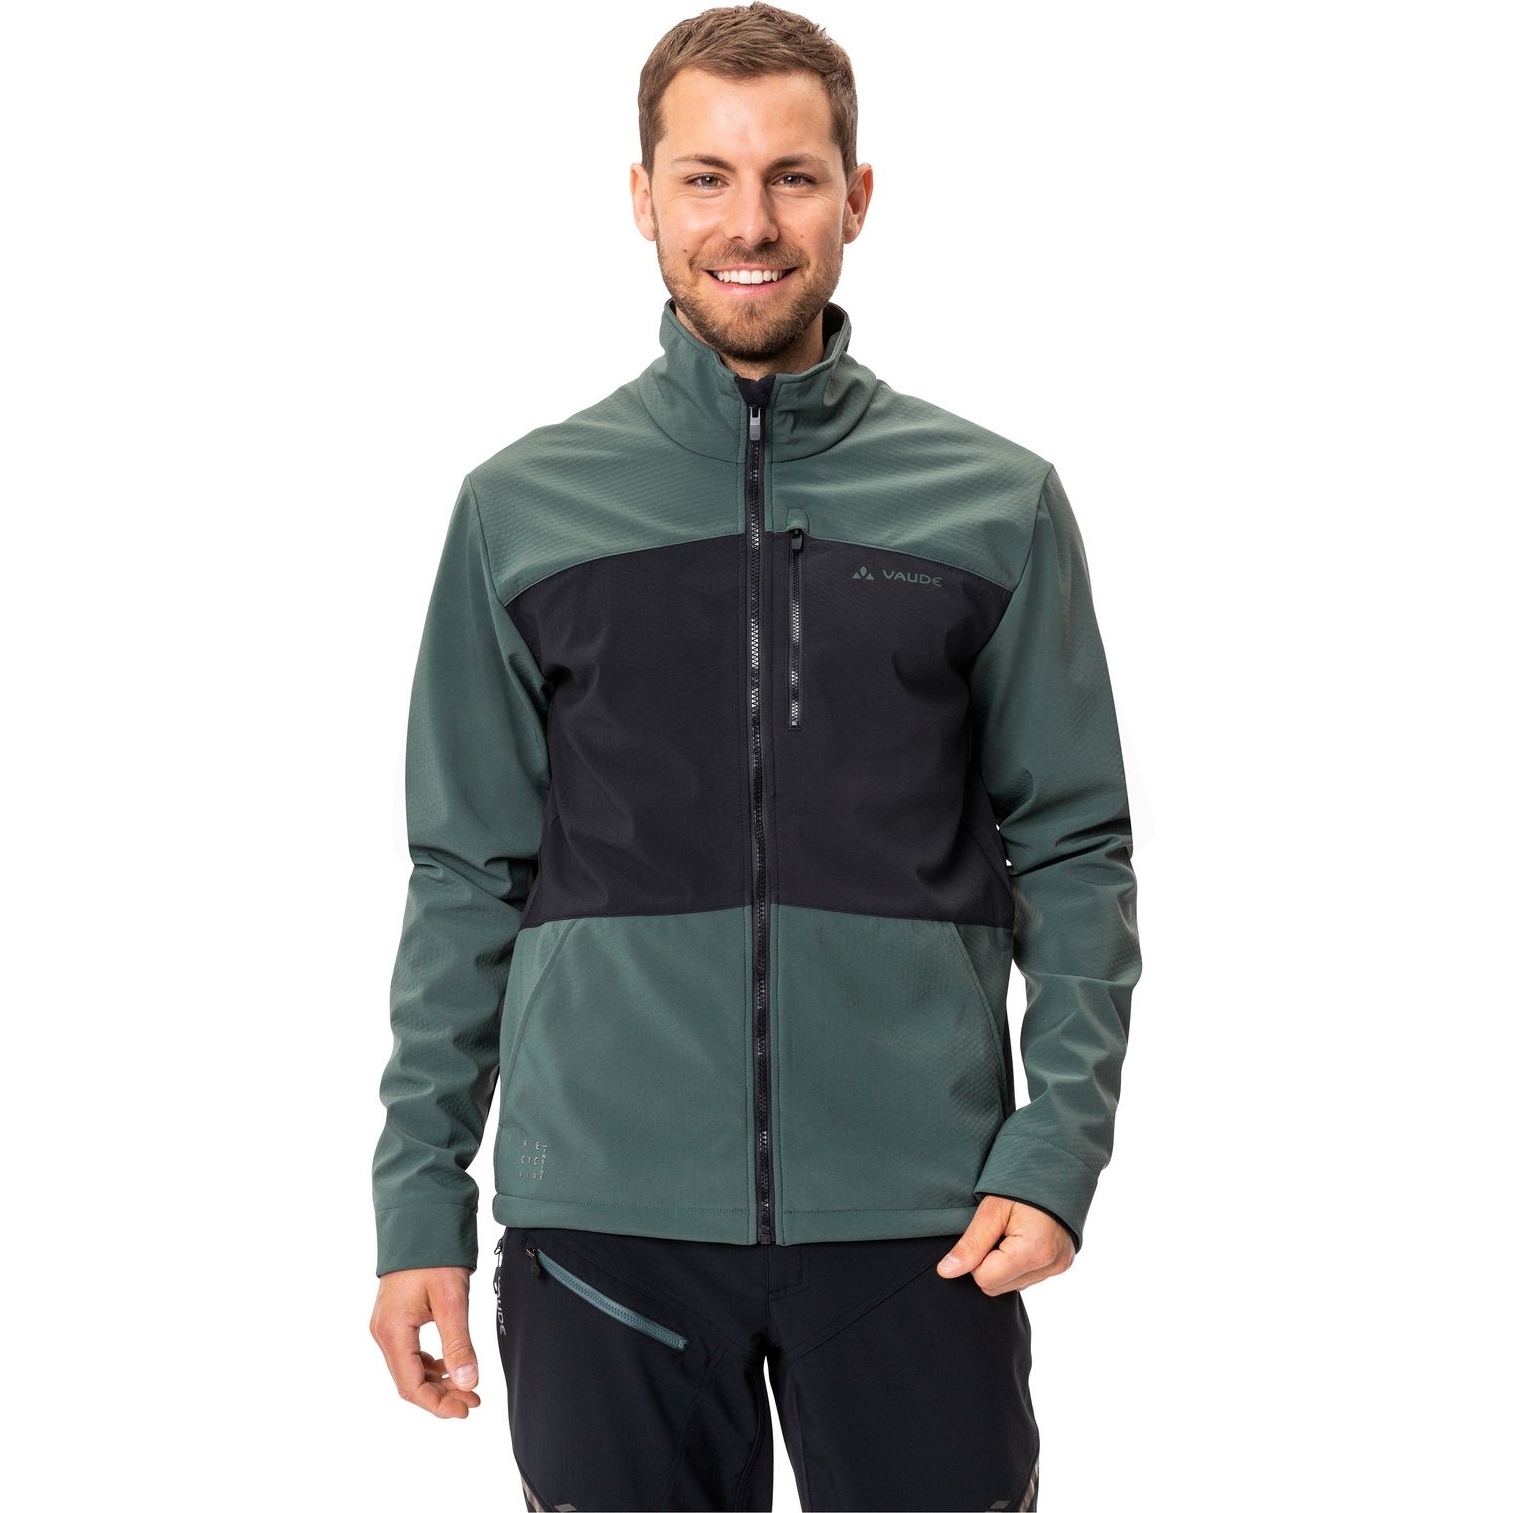 Picture of Vaude Virt Softshell Jacket II Men - dusty forest